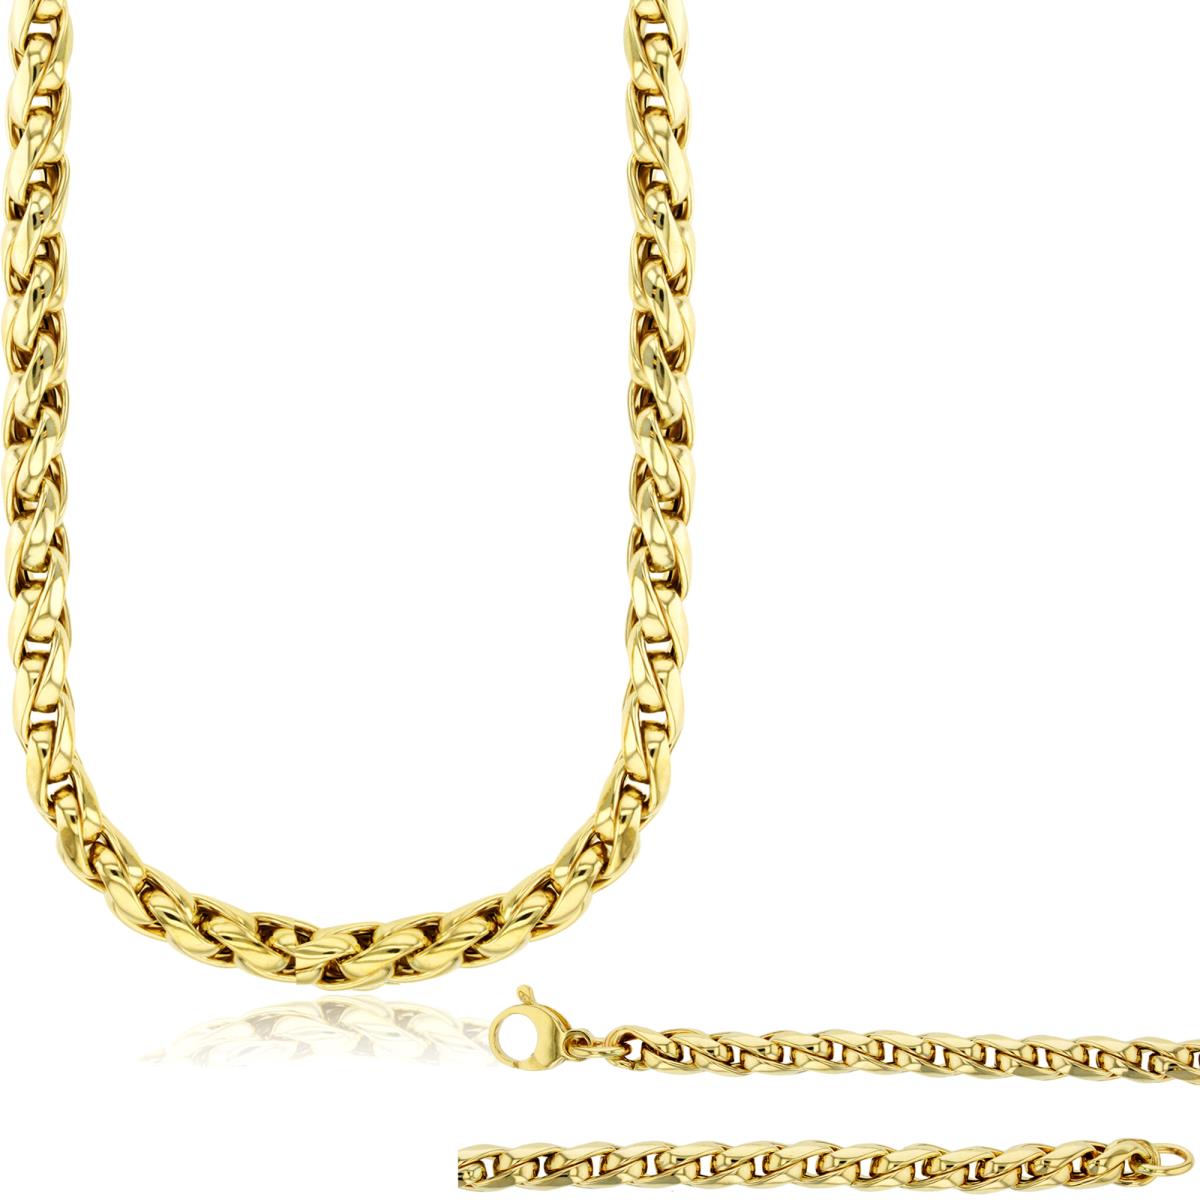 14K Yellow Gold 5mm Twisted Link 18" Chain